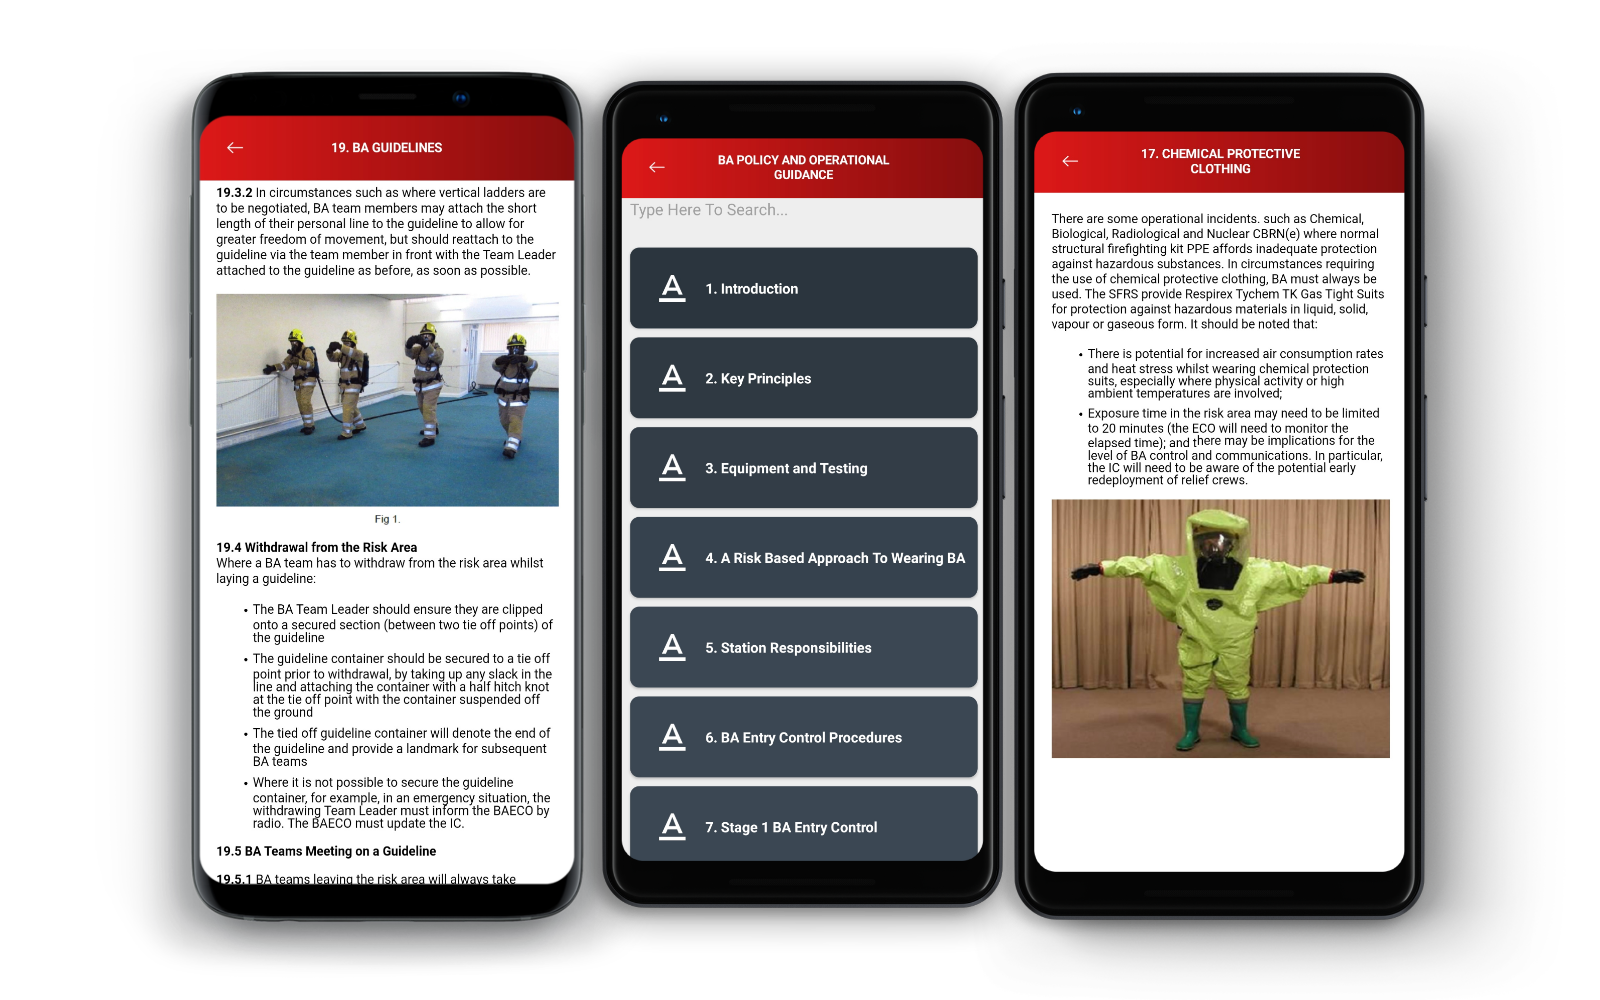 Fire and Rescue Services Using Data Banks. Risk management documents and operational checklists displayed on mobile devices